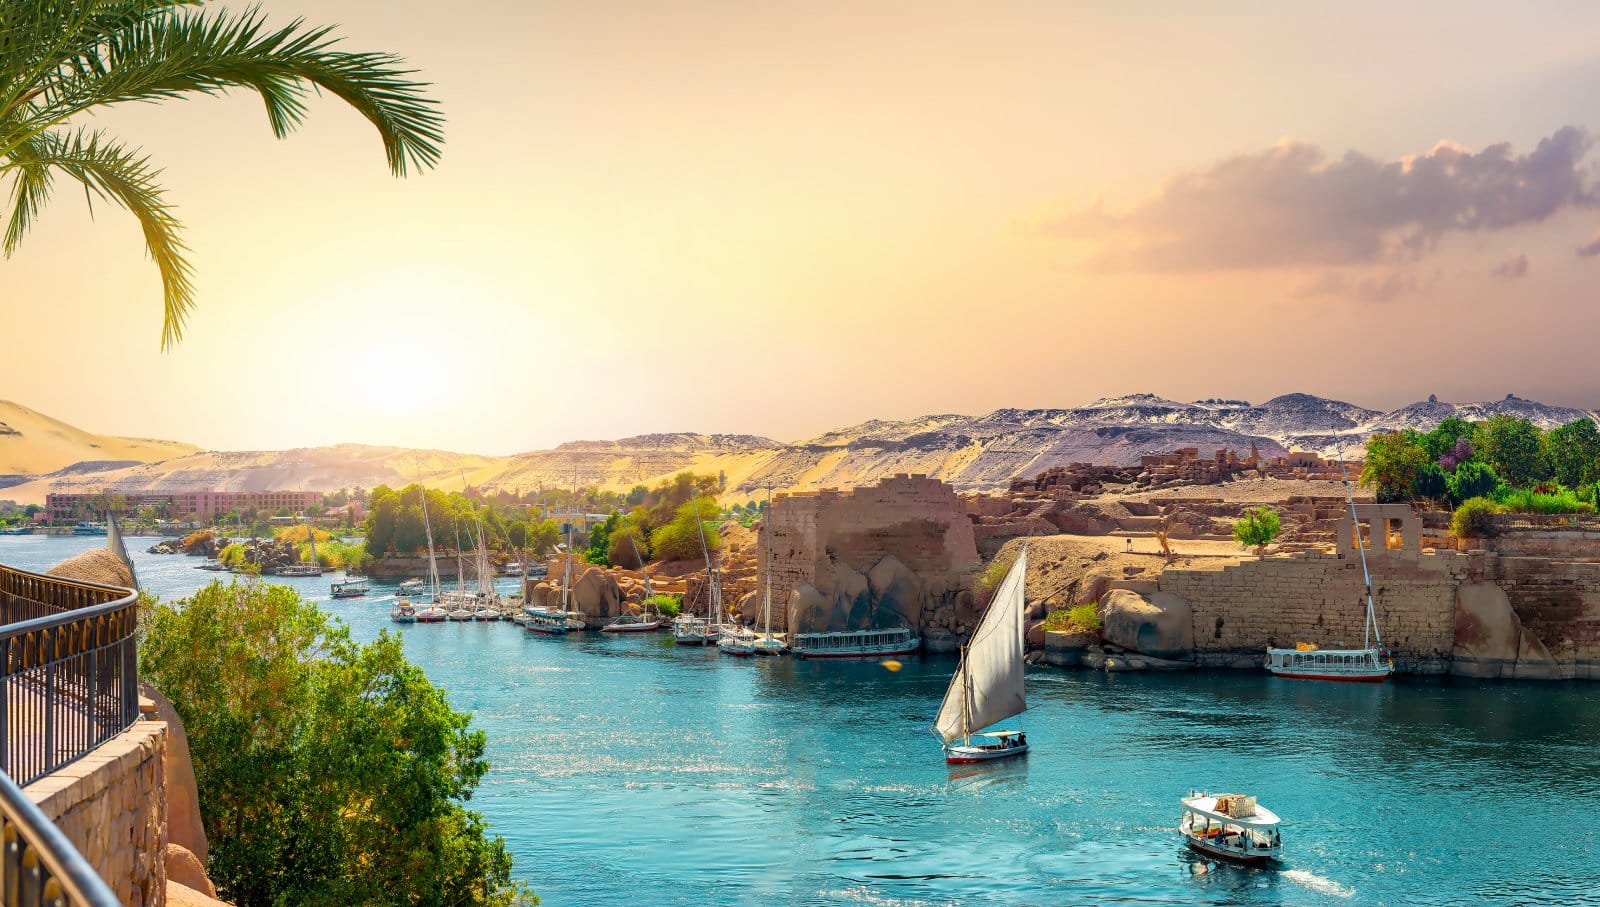 <p class="wp-caption-text">Image Credit: Shutterstock / givaga</p>  <p><span>A Nile River cruise is a quintessential Egyptian experience, offering a leisurely way to explore the country’s ancient heartland. Gliding between Luxor and Aswan, passengers witness life along the Nile’s banks, unchanged in many ways since the time of the pharaohs. Stops at iconic sites such as the temples of Karnak and Luxor, the Valley of the Kings, Edfu, and Kom Ombo allow for in-depth exploration of Egypt’s monumental history. Modern cruise boats provide comfortable accommodations and amenities, ensuring a relaxing journey through Egypt’s landscapes and millennia of history. A Nile cruise connects the major archaeological sites in a meaningful sequence and offers a glimpse into the enduring importance of the Nile to Egyptian civilization.</span></p>